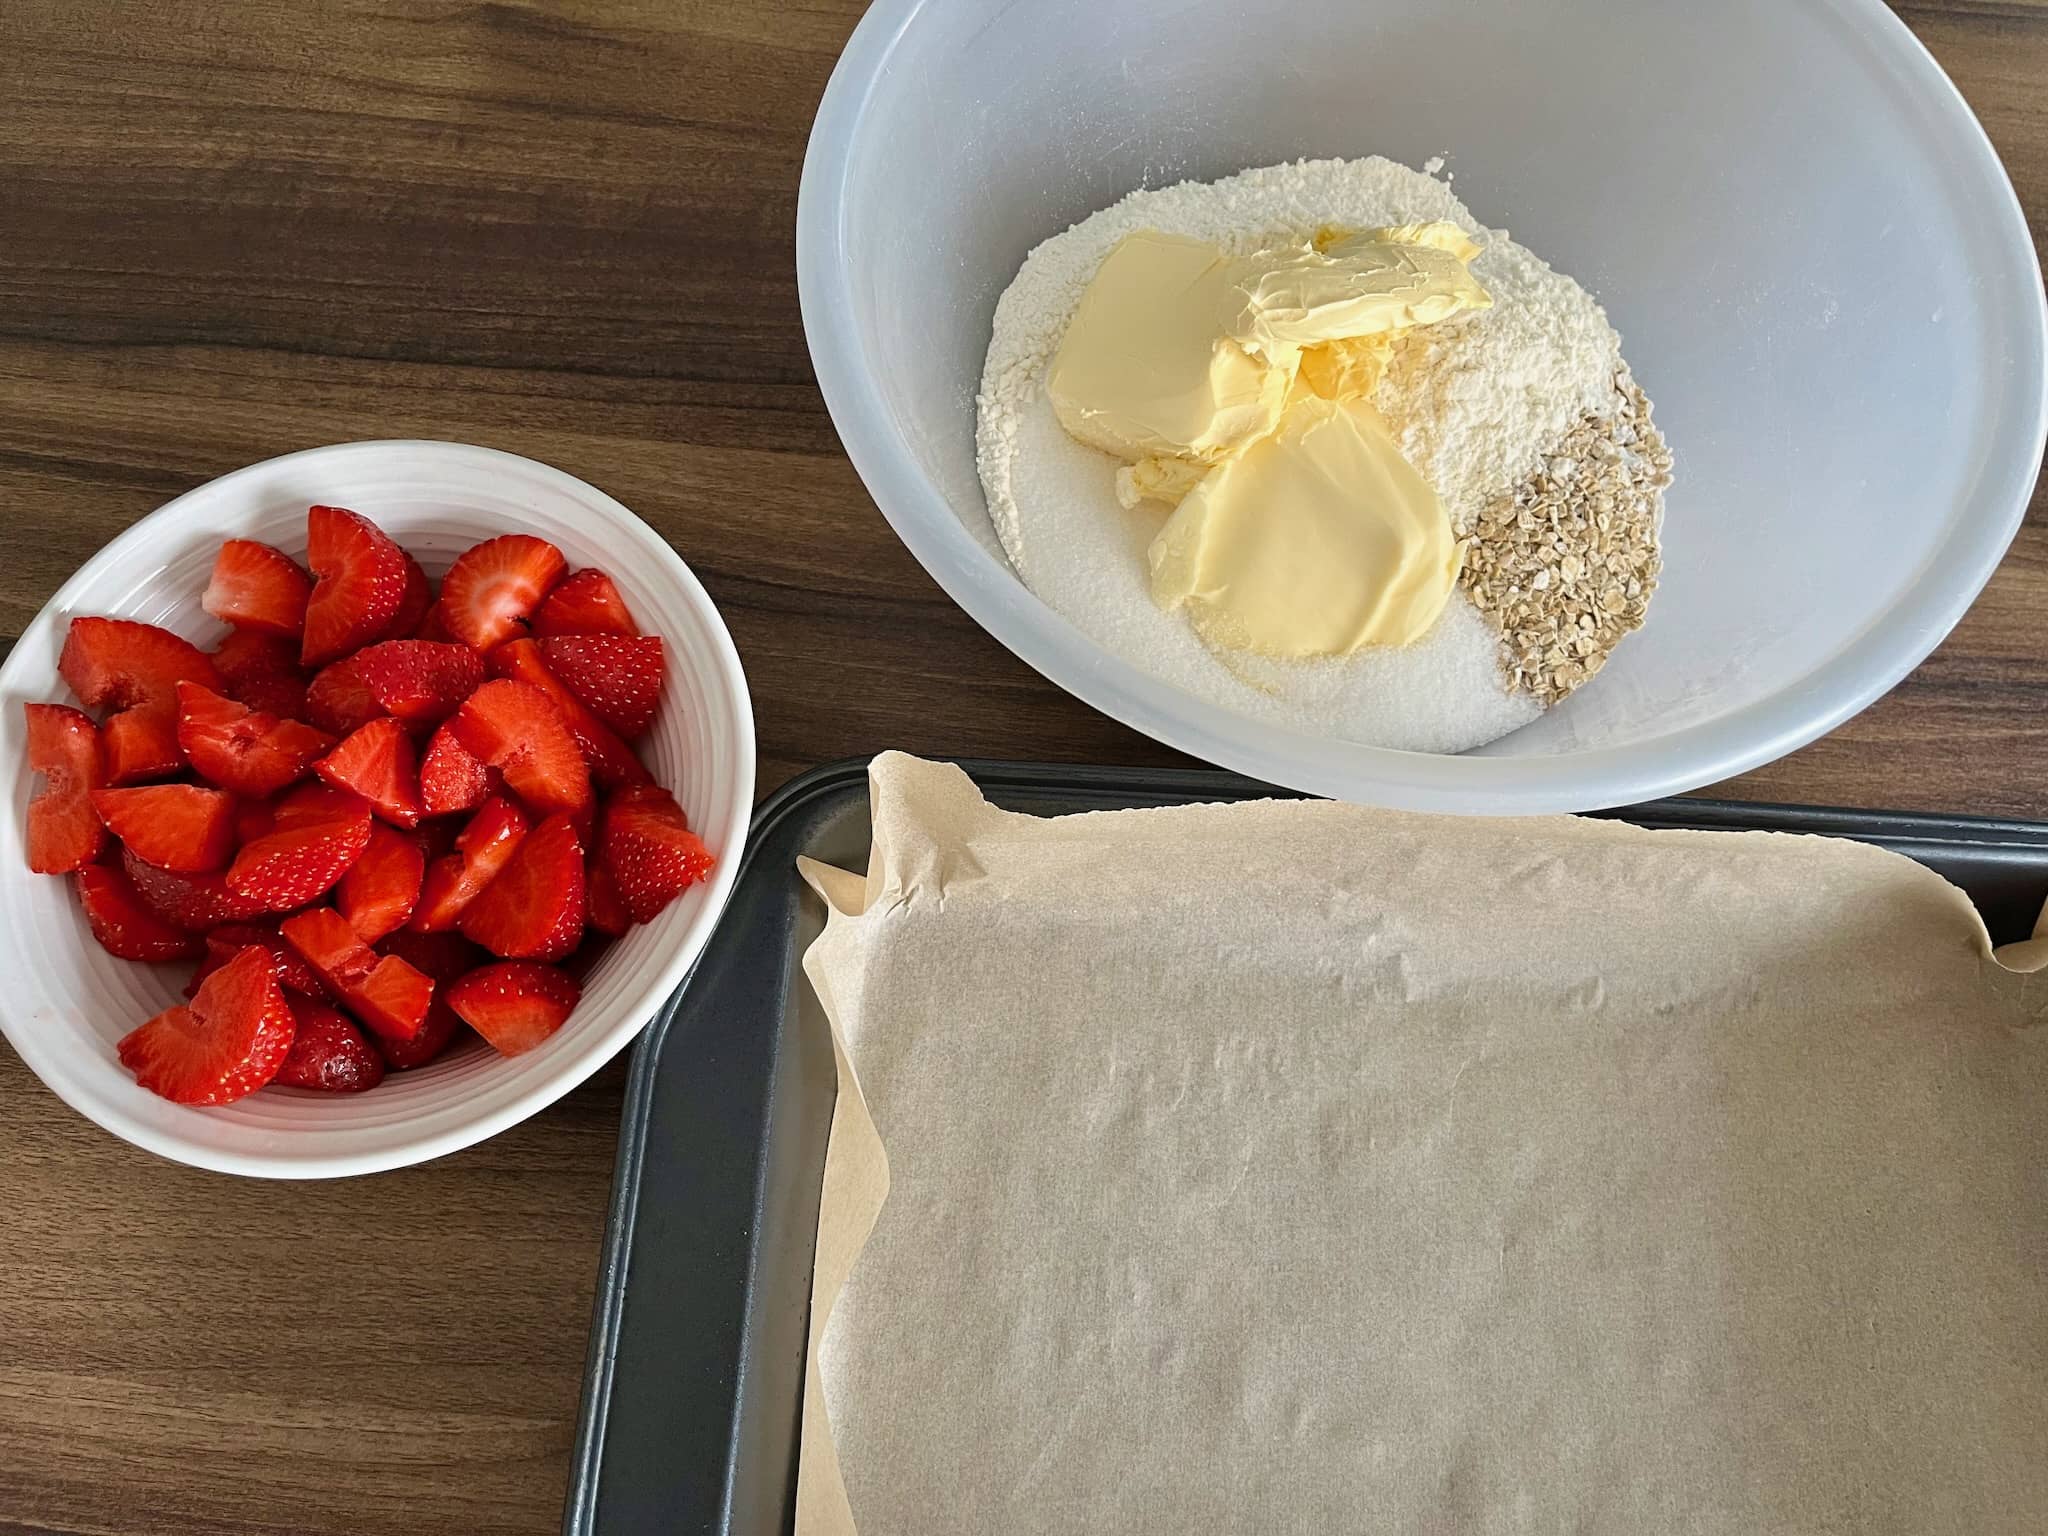 Strawberries cut, tray lined with baking paper and other ingredients in a bowl